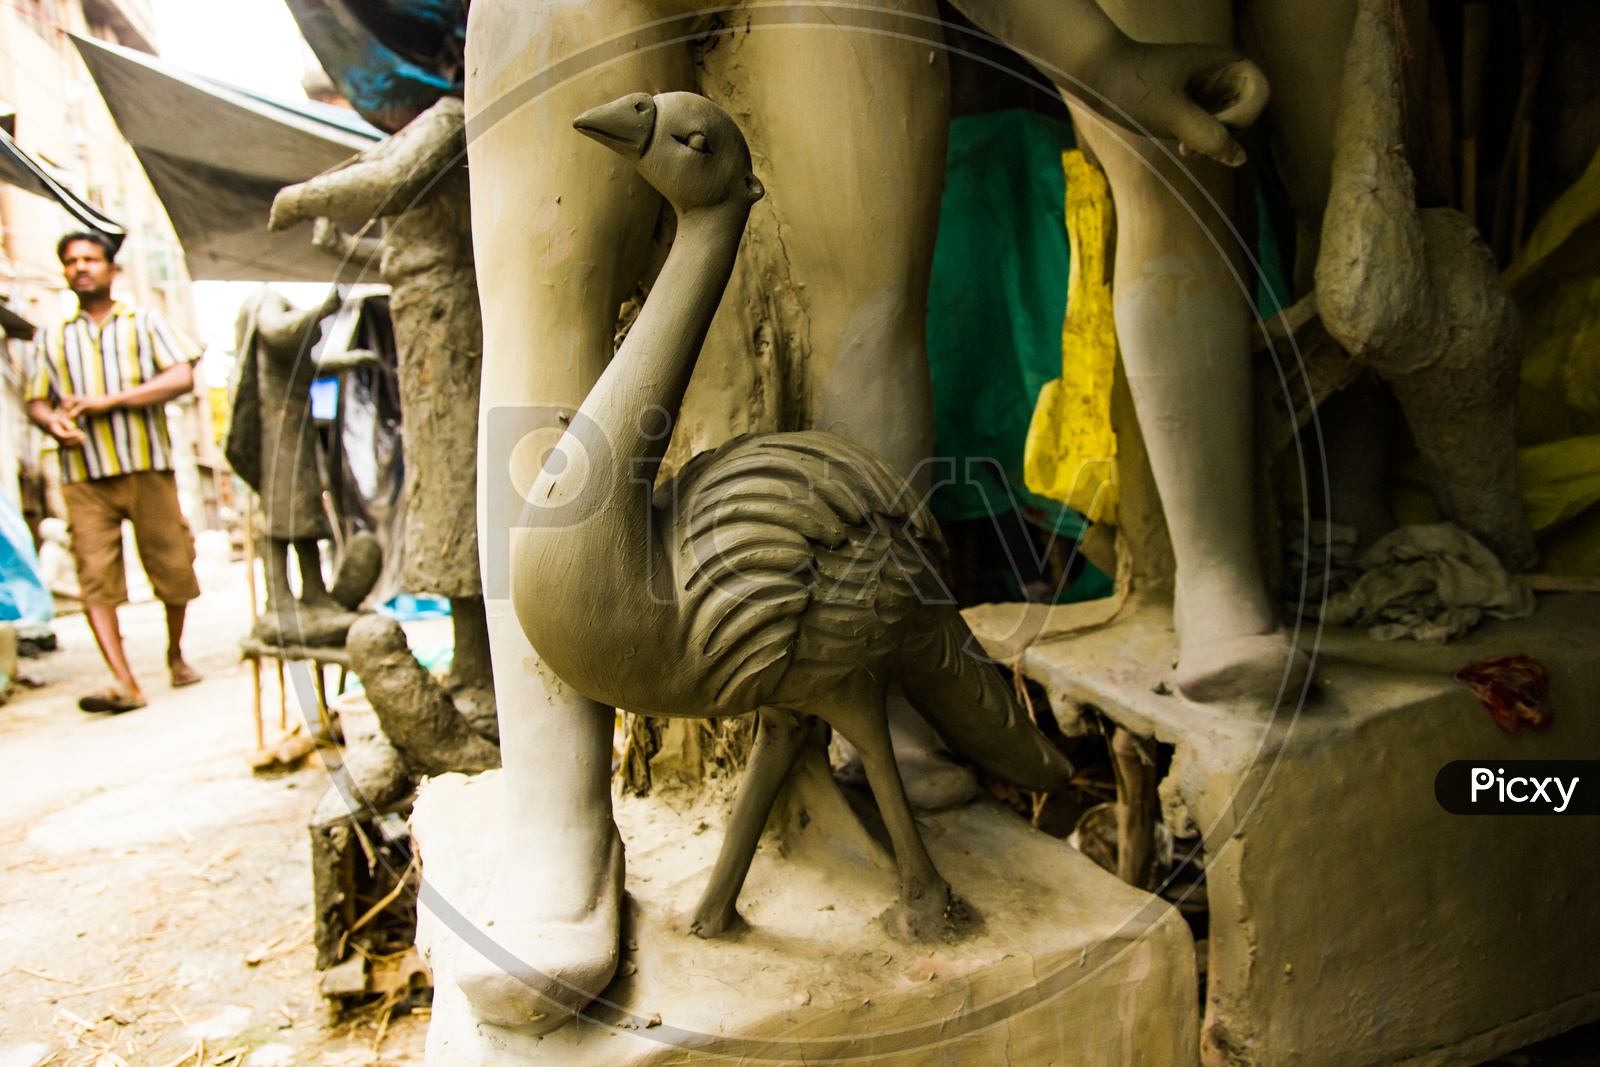 Kumartuli,West Bengal, India, July 2018. A Clay Statue Of A Peacock Under Construction At A Shop During Day Time For Sale